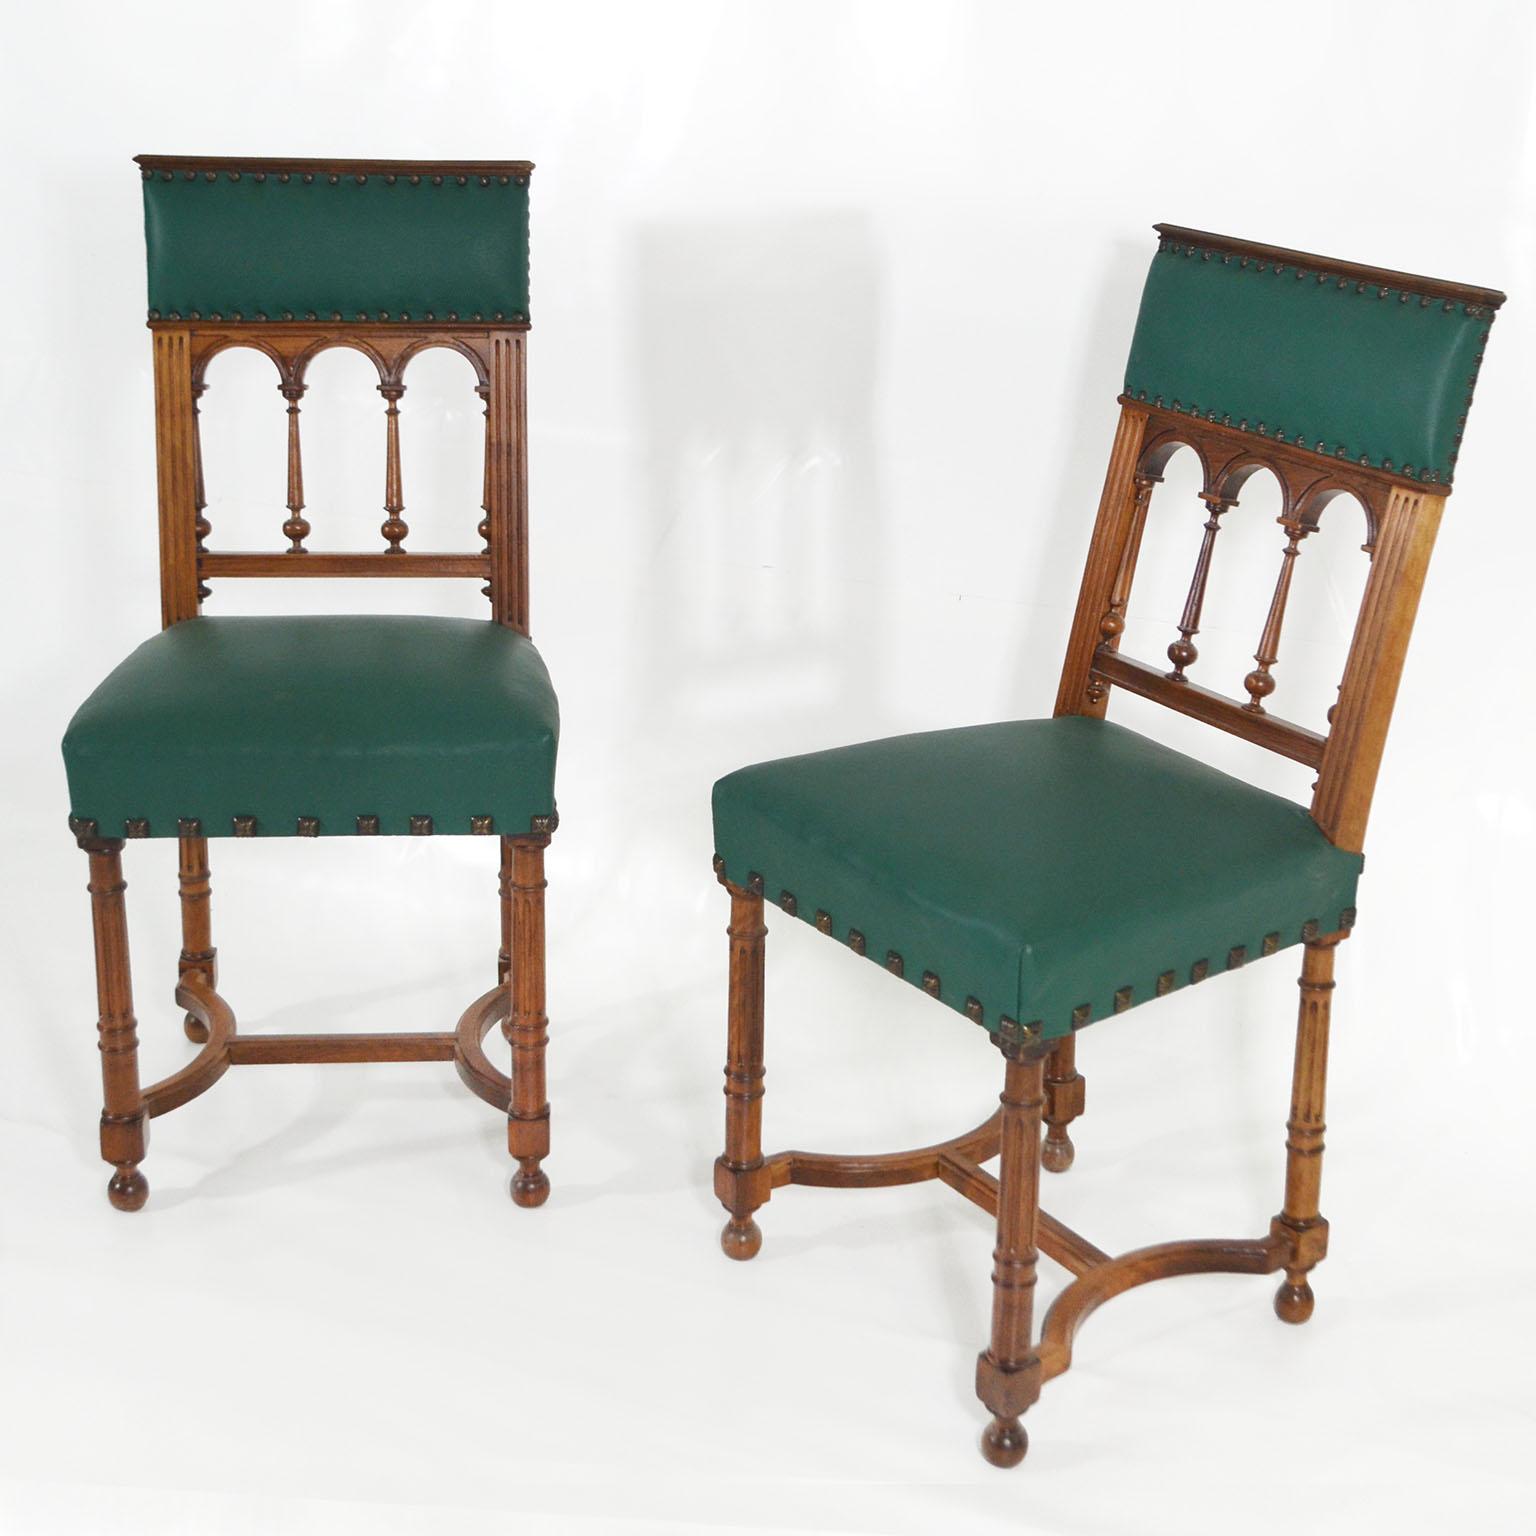 Exquisite 19th century pair of Catalan accent chairs, made of solid wood, hand carved, dark green leather upholstery, embellished with highly decorative pins. Excellent condition, professionally restored.
Dimensions (W x D x H):
45 x 54 x 95 cm